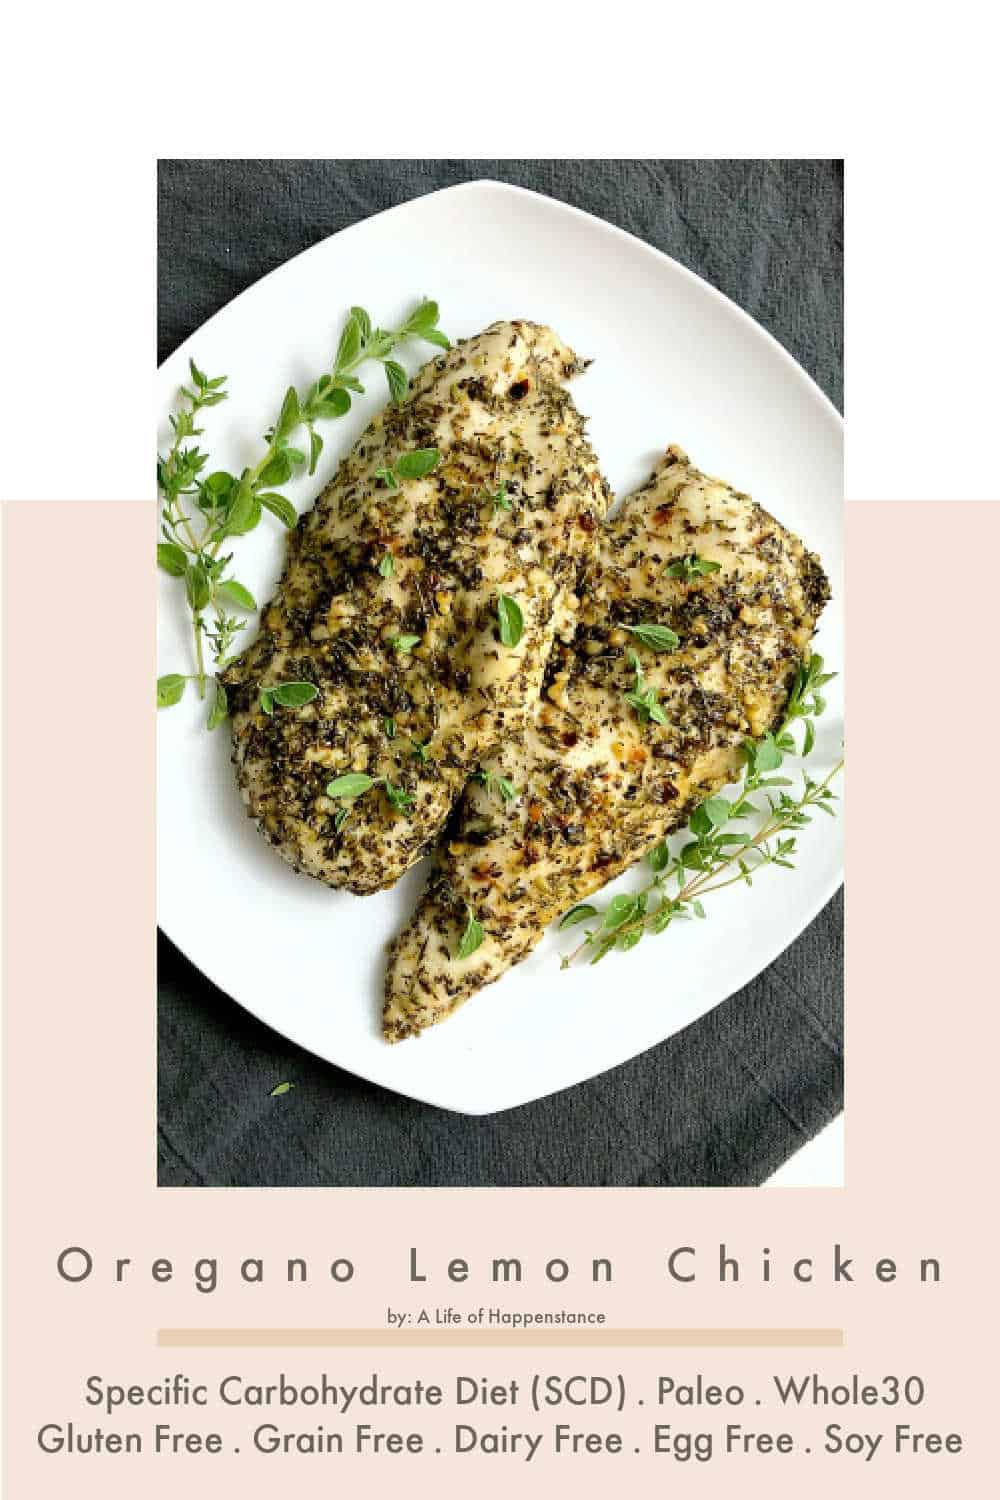 This oregano lemon chicken is a delicious, flavorful, and healthy dinner recipe that's perfect anytime of the year! It's a simple main meal that follows Paleo, Whole30, and SCD (specific carbohydrate diet). It's also gluten free, grain free, dairy free, soy free, and egg free.  